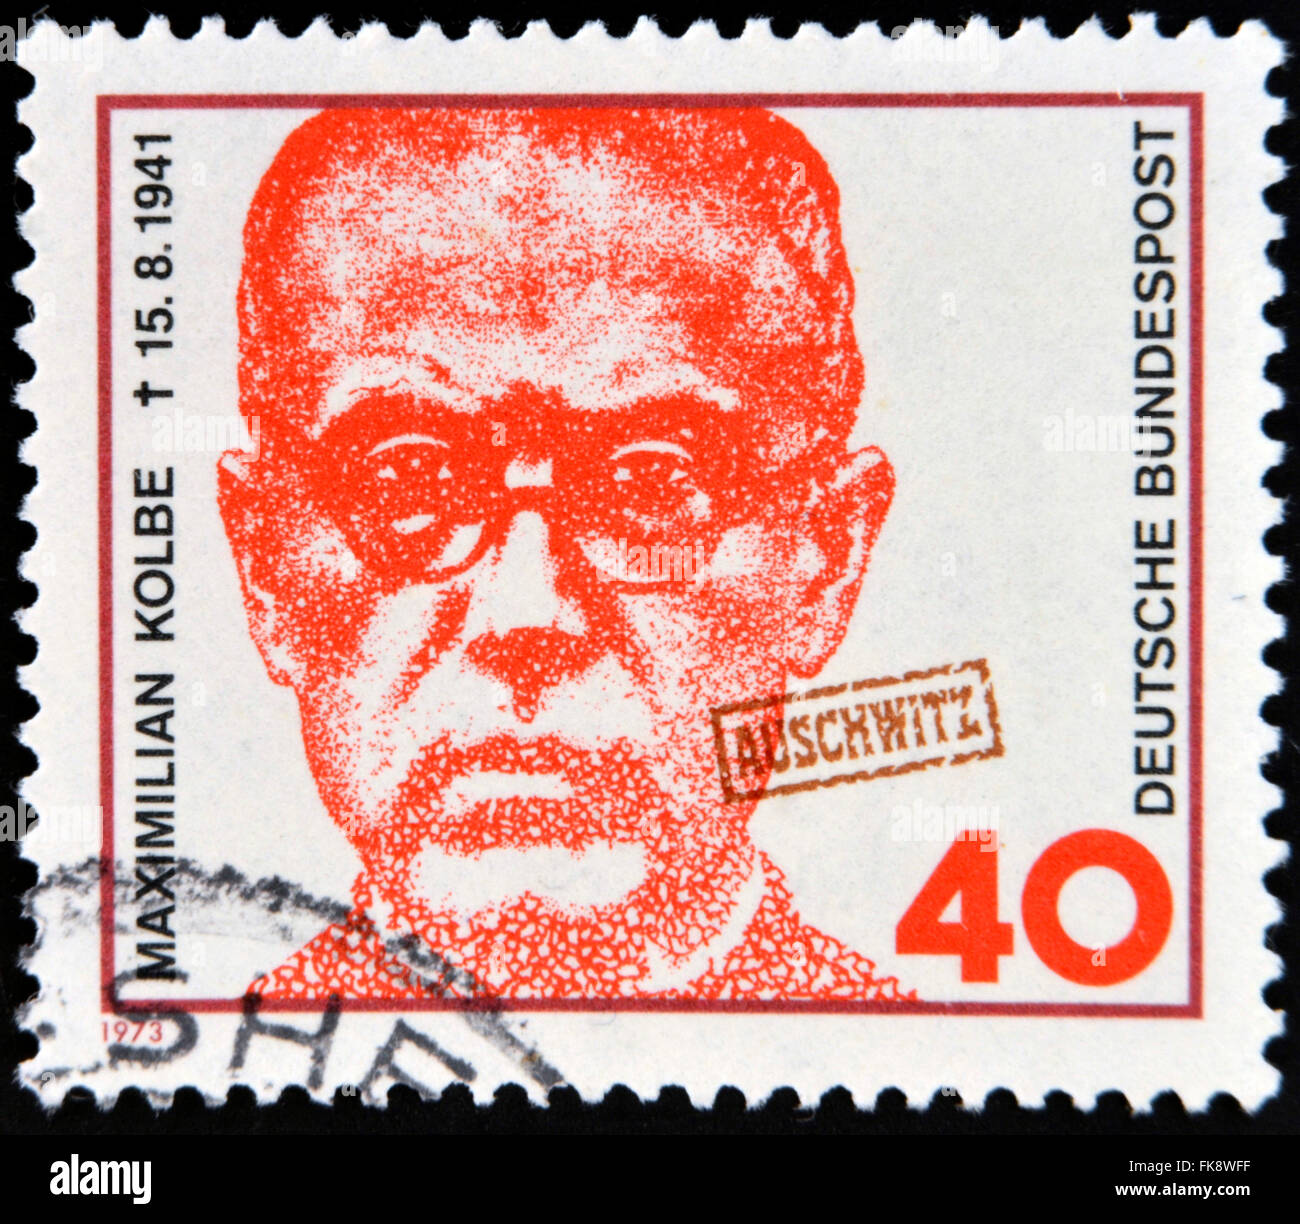 GERMANY - CIRCA 1973: a stamp printed in Germany shows Maximilian Kolbe, Polish Priest who Died in Auschwitz Stock Photo